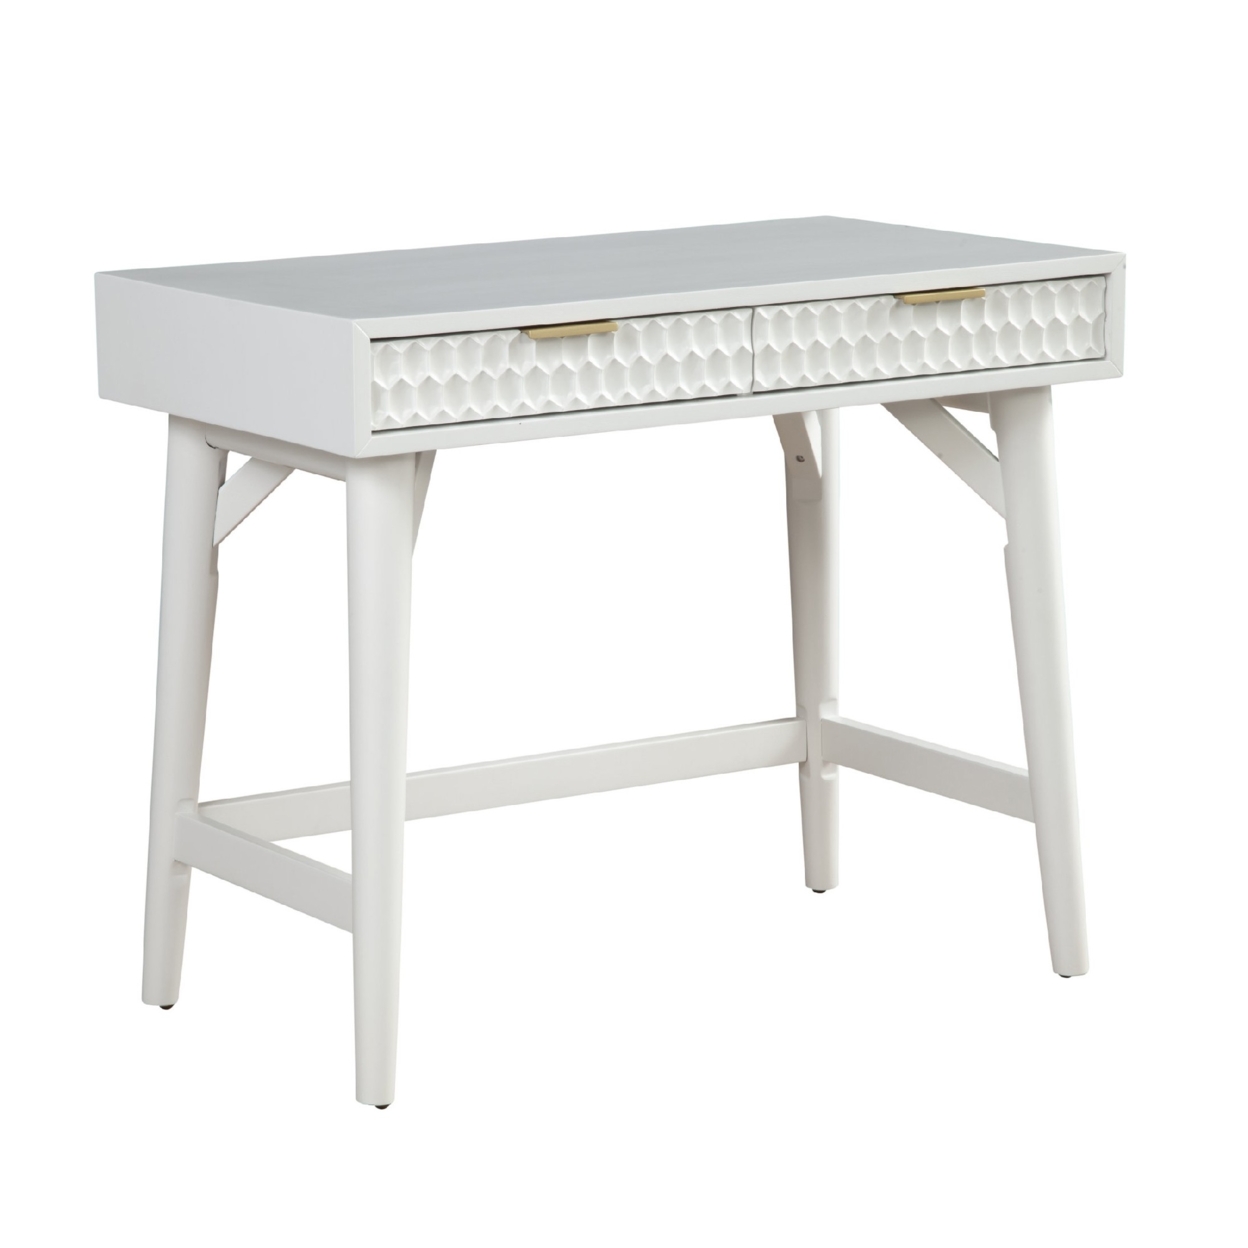 Writing Desk With 2 Drawers And Wooden Frame, White- Saltoro Sherpi